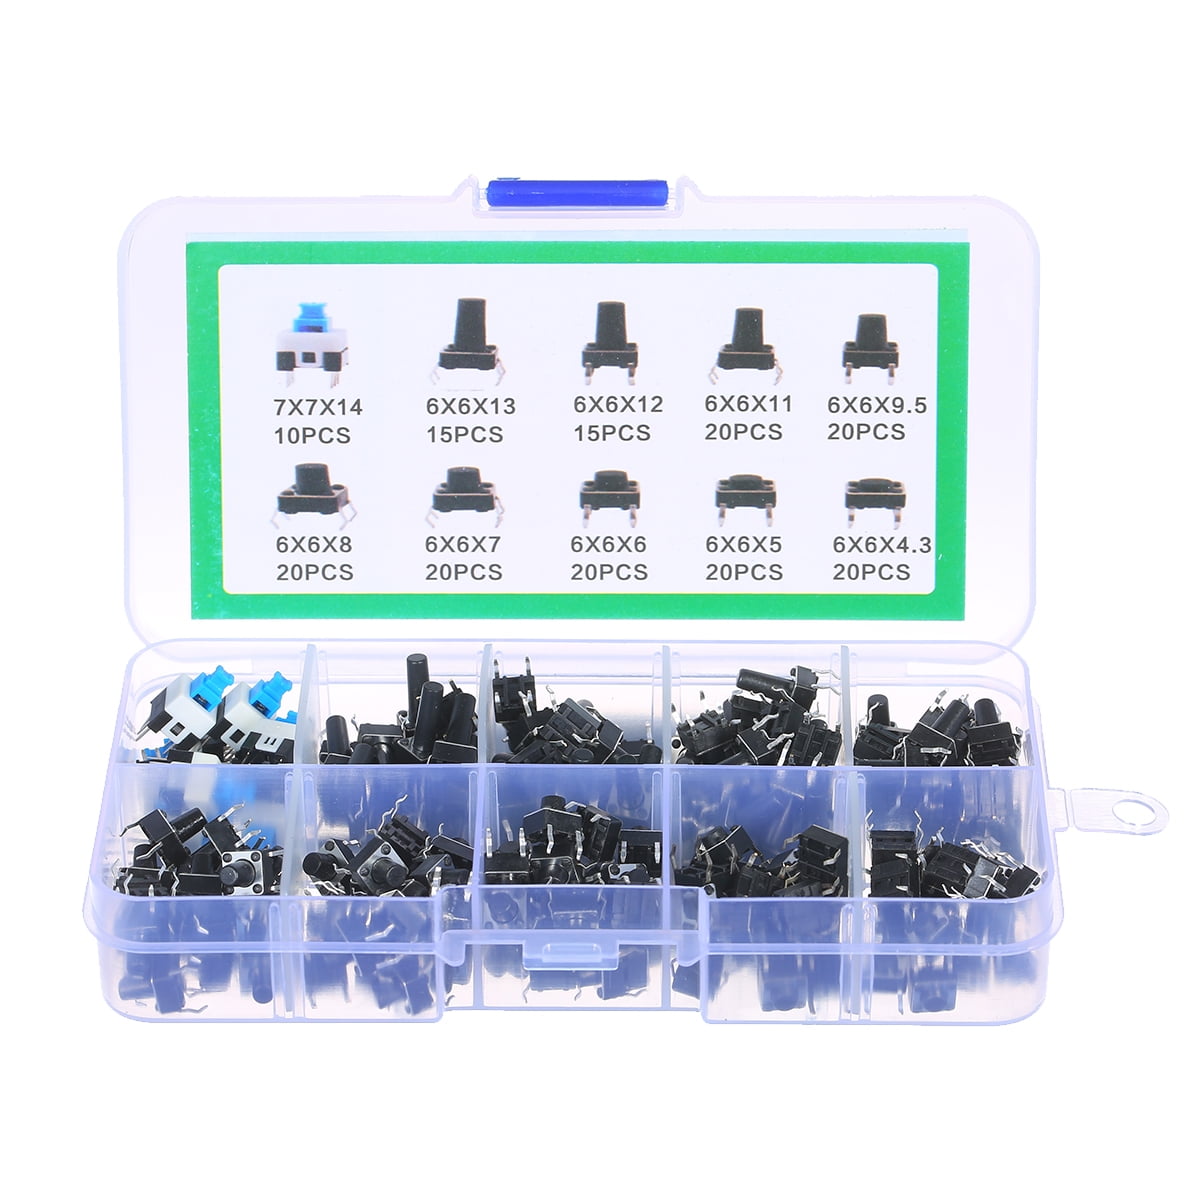 tact cap JC DD 20PCS tactile push button switch momentary micro switch button 